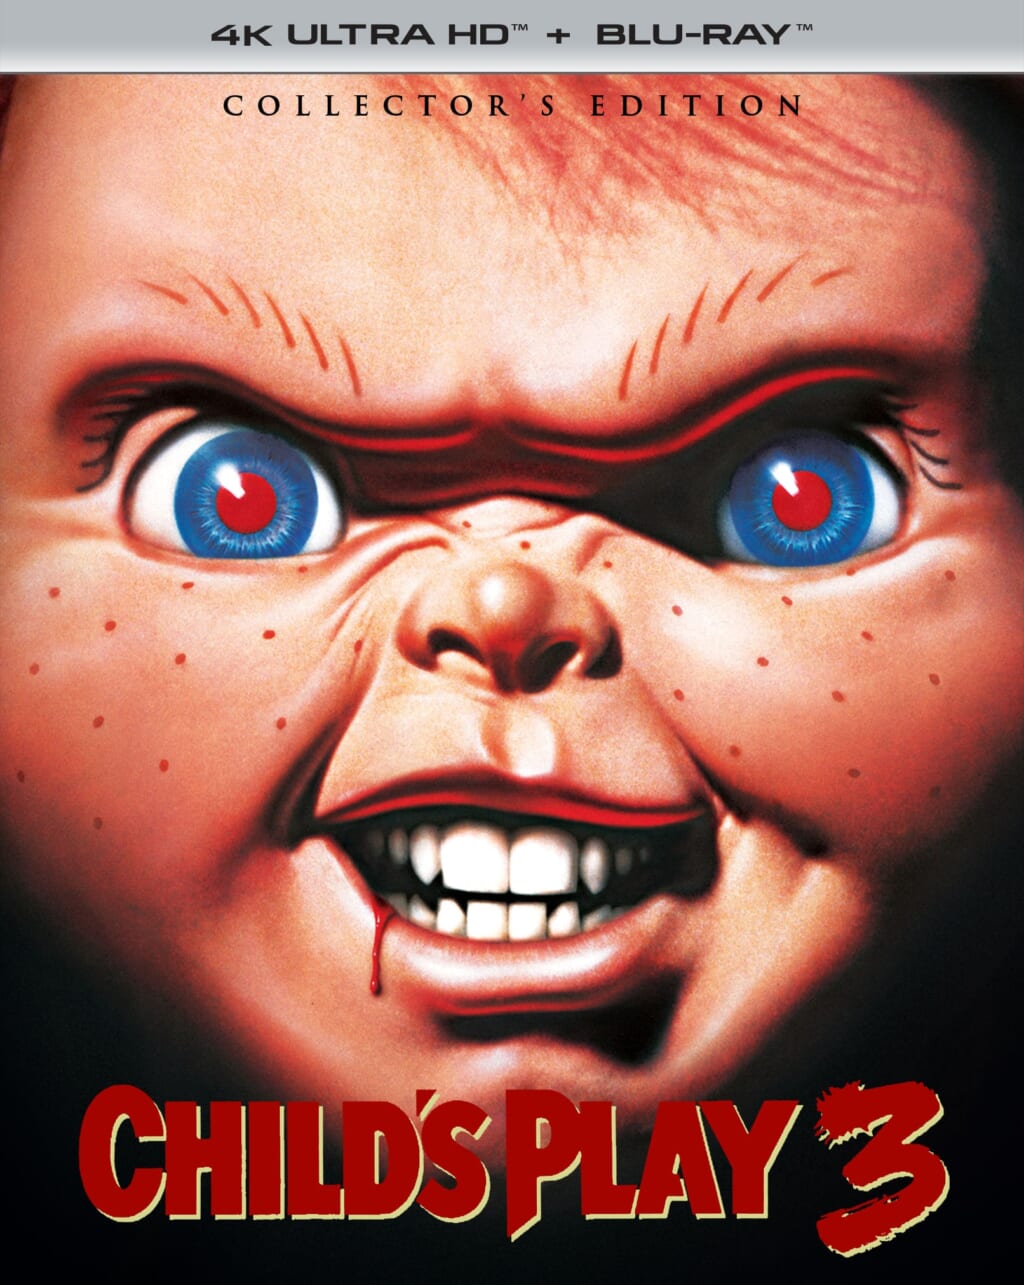 childs play 3 4k 1024x1285 - 'Child's Play 3': Don't F*** with the Chuck  [4K Review]